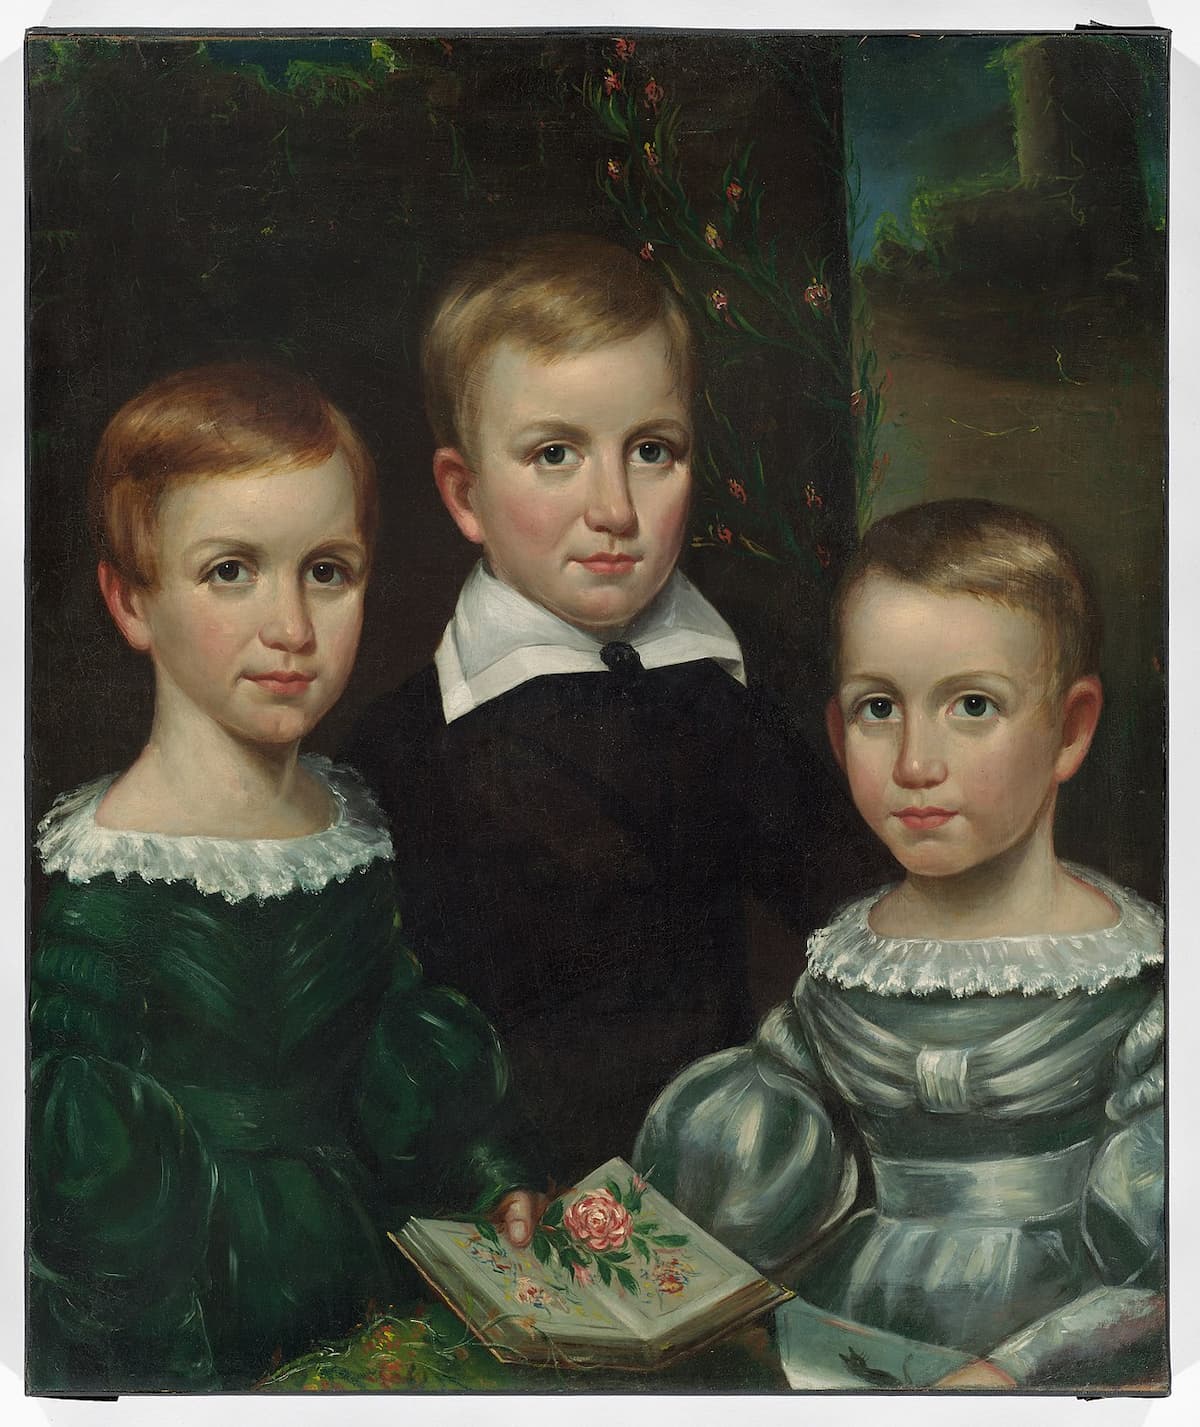 Painting of the Dickinson children (Emily on the left)